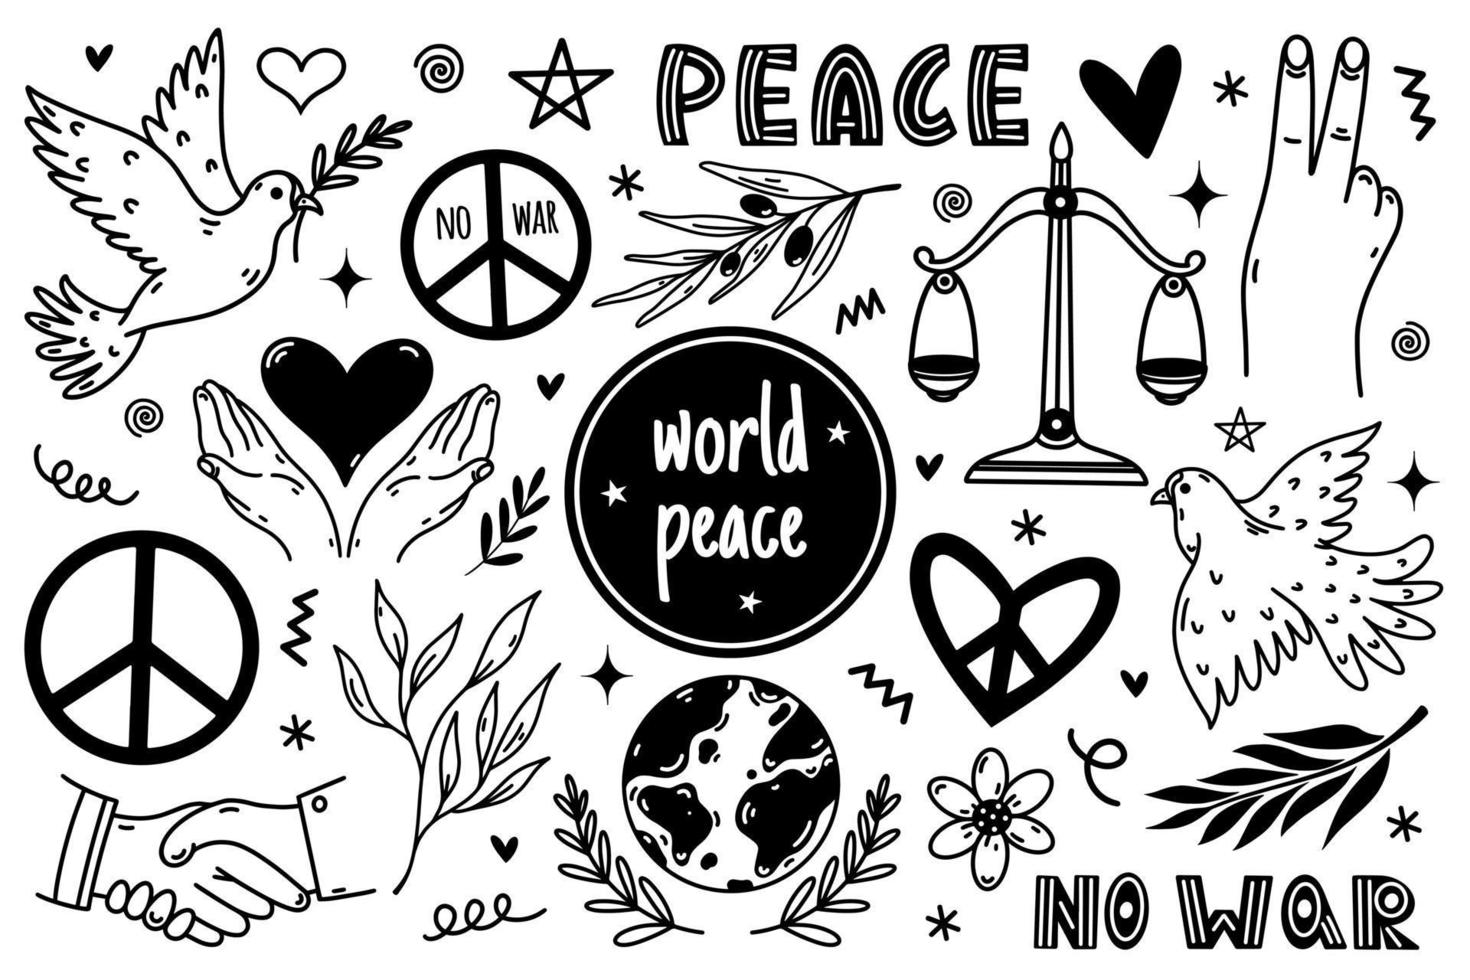 Peace symbol icon set. Hand drawn illustration isolated on white background. Pacifism sign - dove, handshake, olive branch, heart, planet. No war, monochrome doodle collection. vector